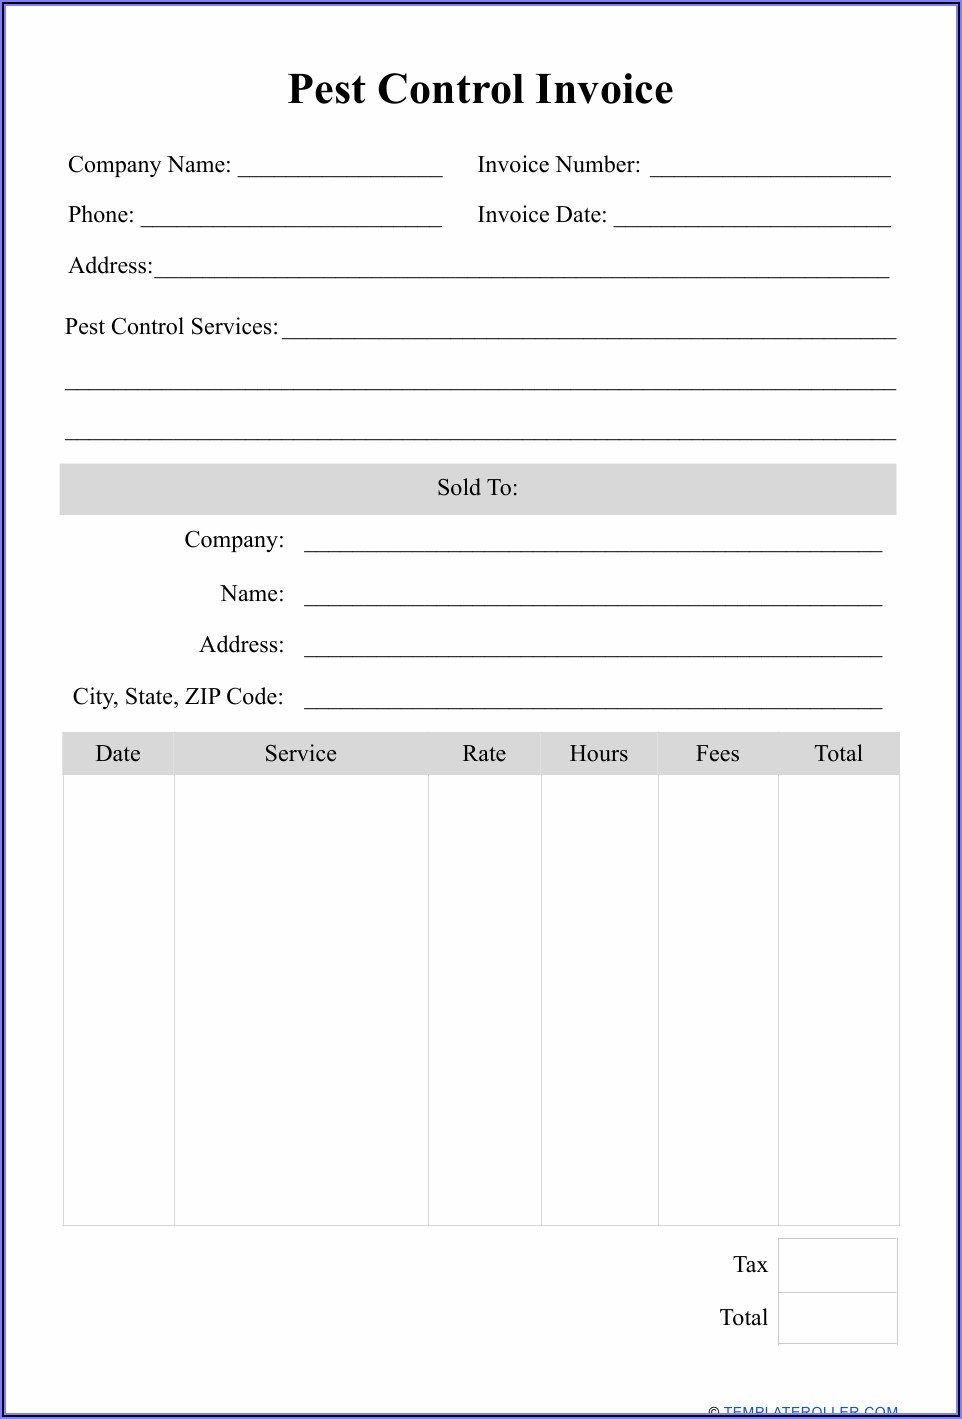 Pest Control Forms Templates Free